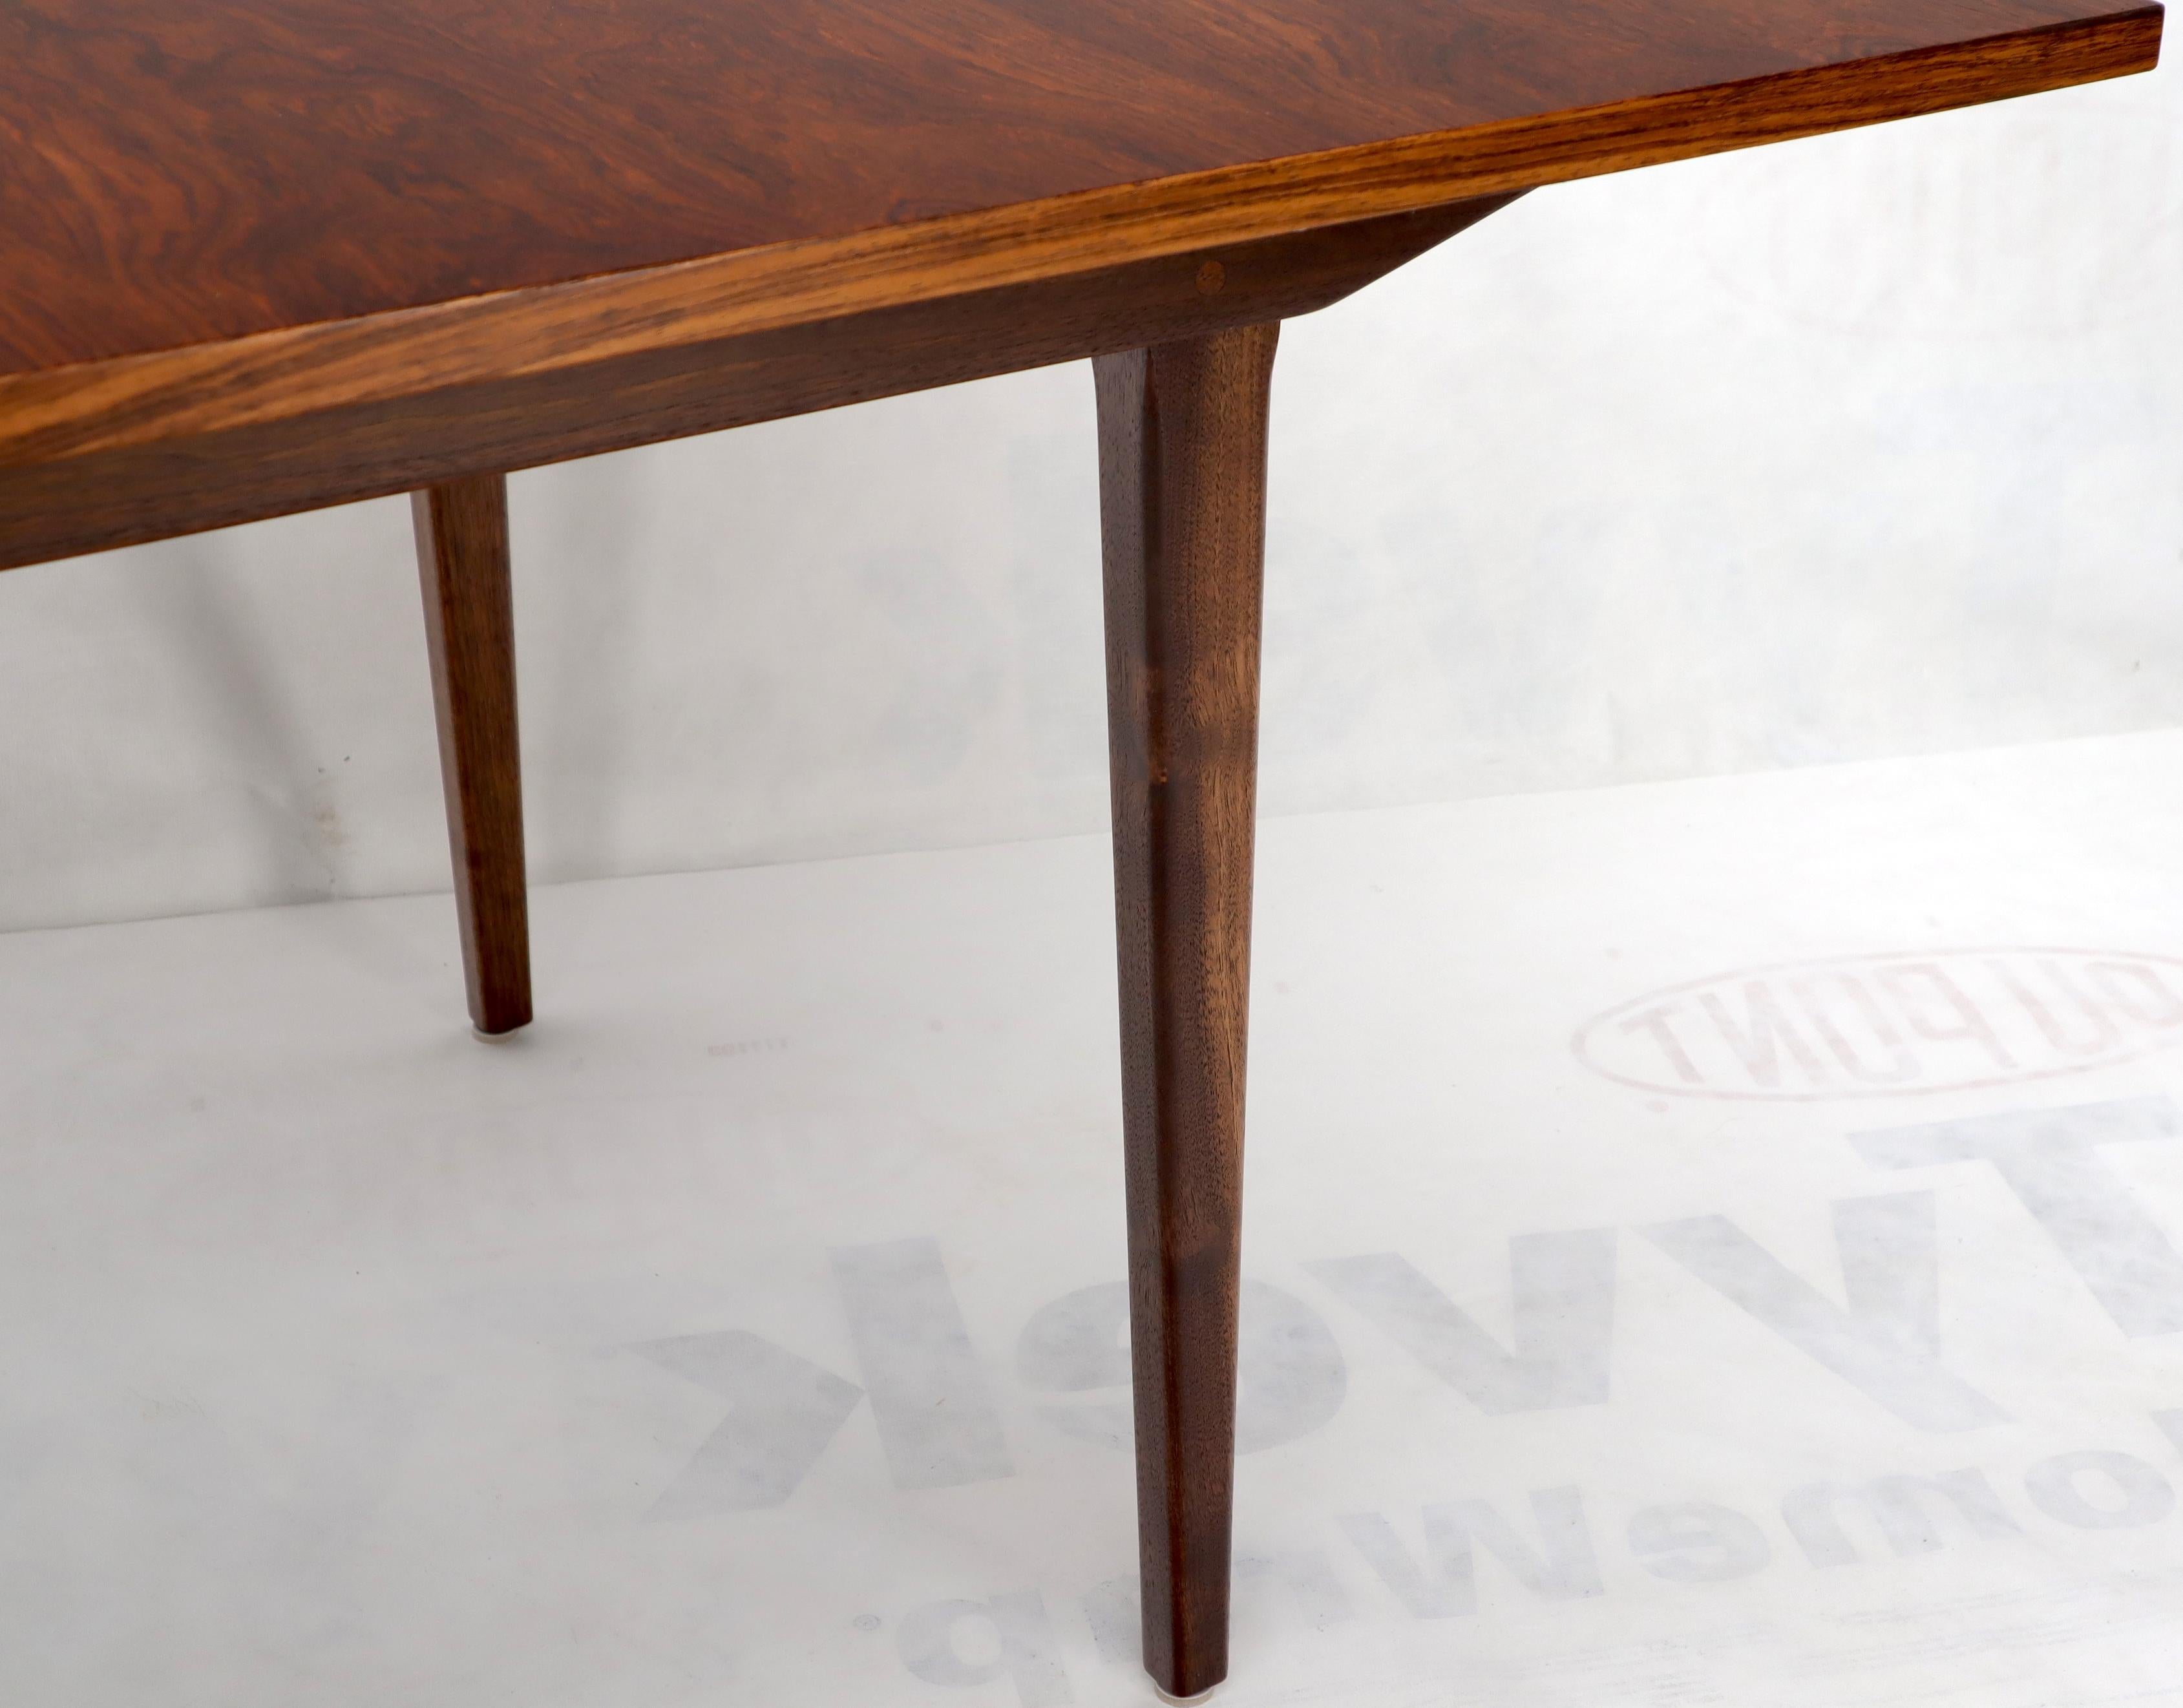 American Rosewood Rectangular Dining Table by George Nelson for Herman Miller 2 Leaves For Sale